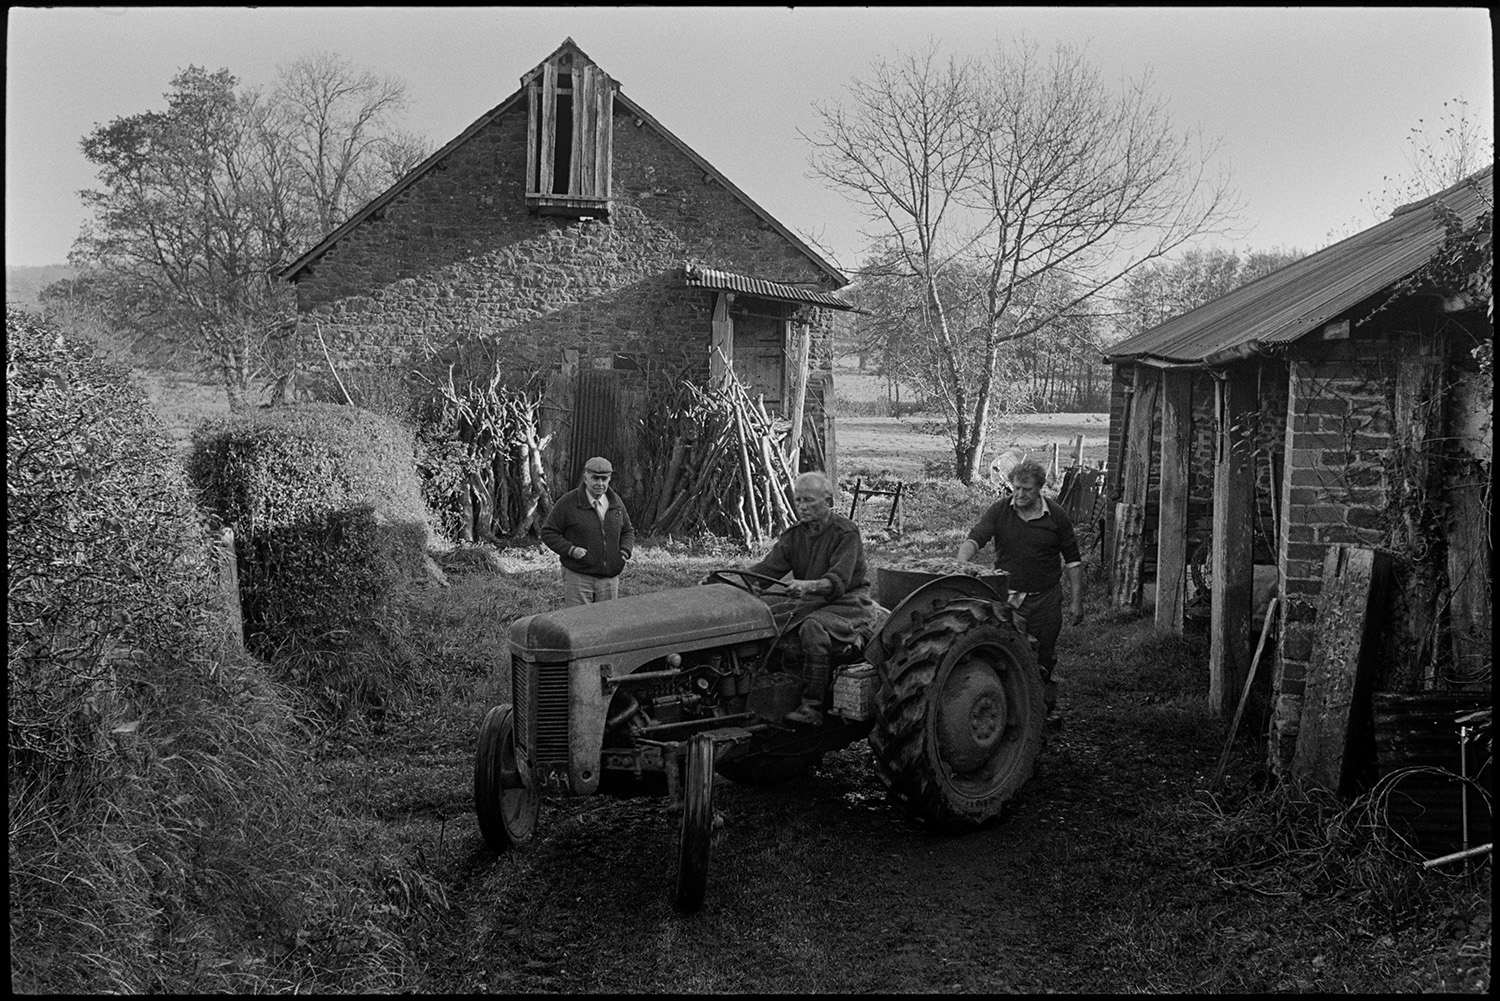 Cider making, apple crusher and cider press. 
[Bill Hammond driving a tractor with barrels of apple pulp for cider making at Rashleigh Mill, Bridge Reeve. Two other men are watching. The mill building with woodpiles stacked against one end is visible in the background.]